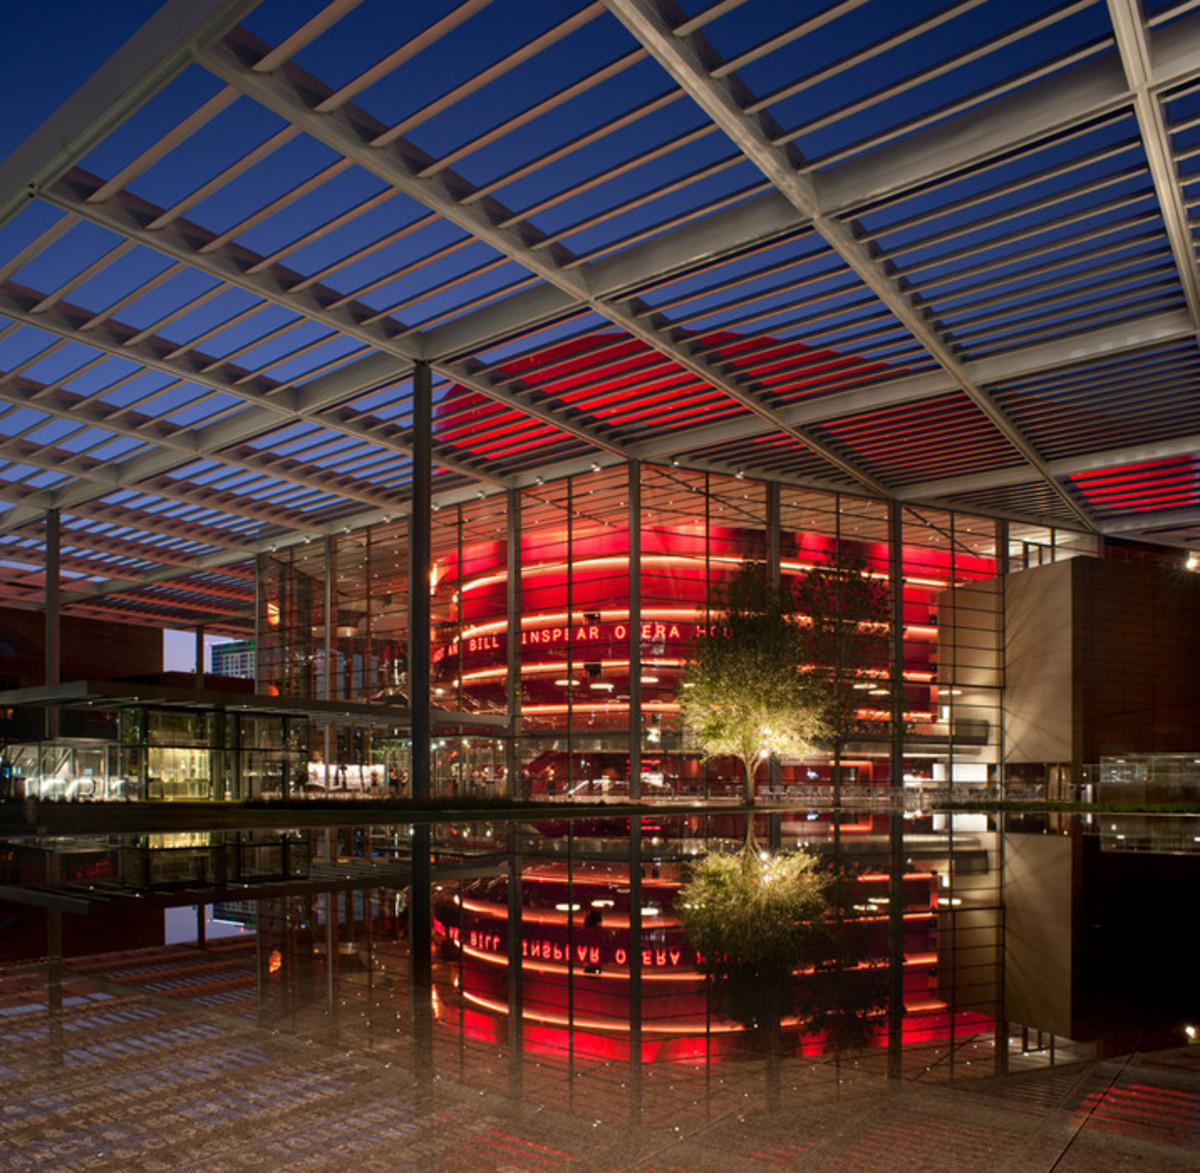 The Winspear Opera House Foster + Partners United States of America